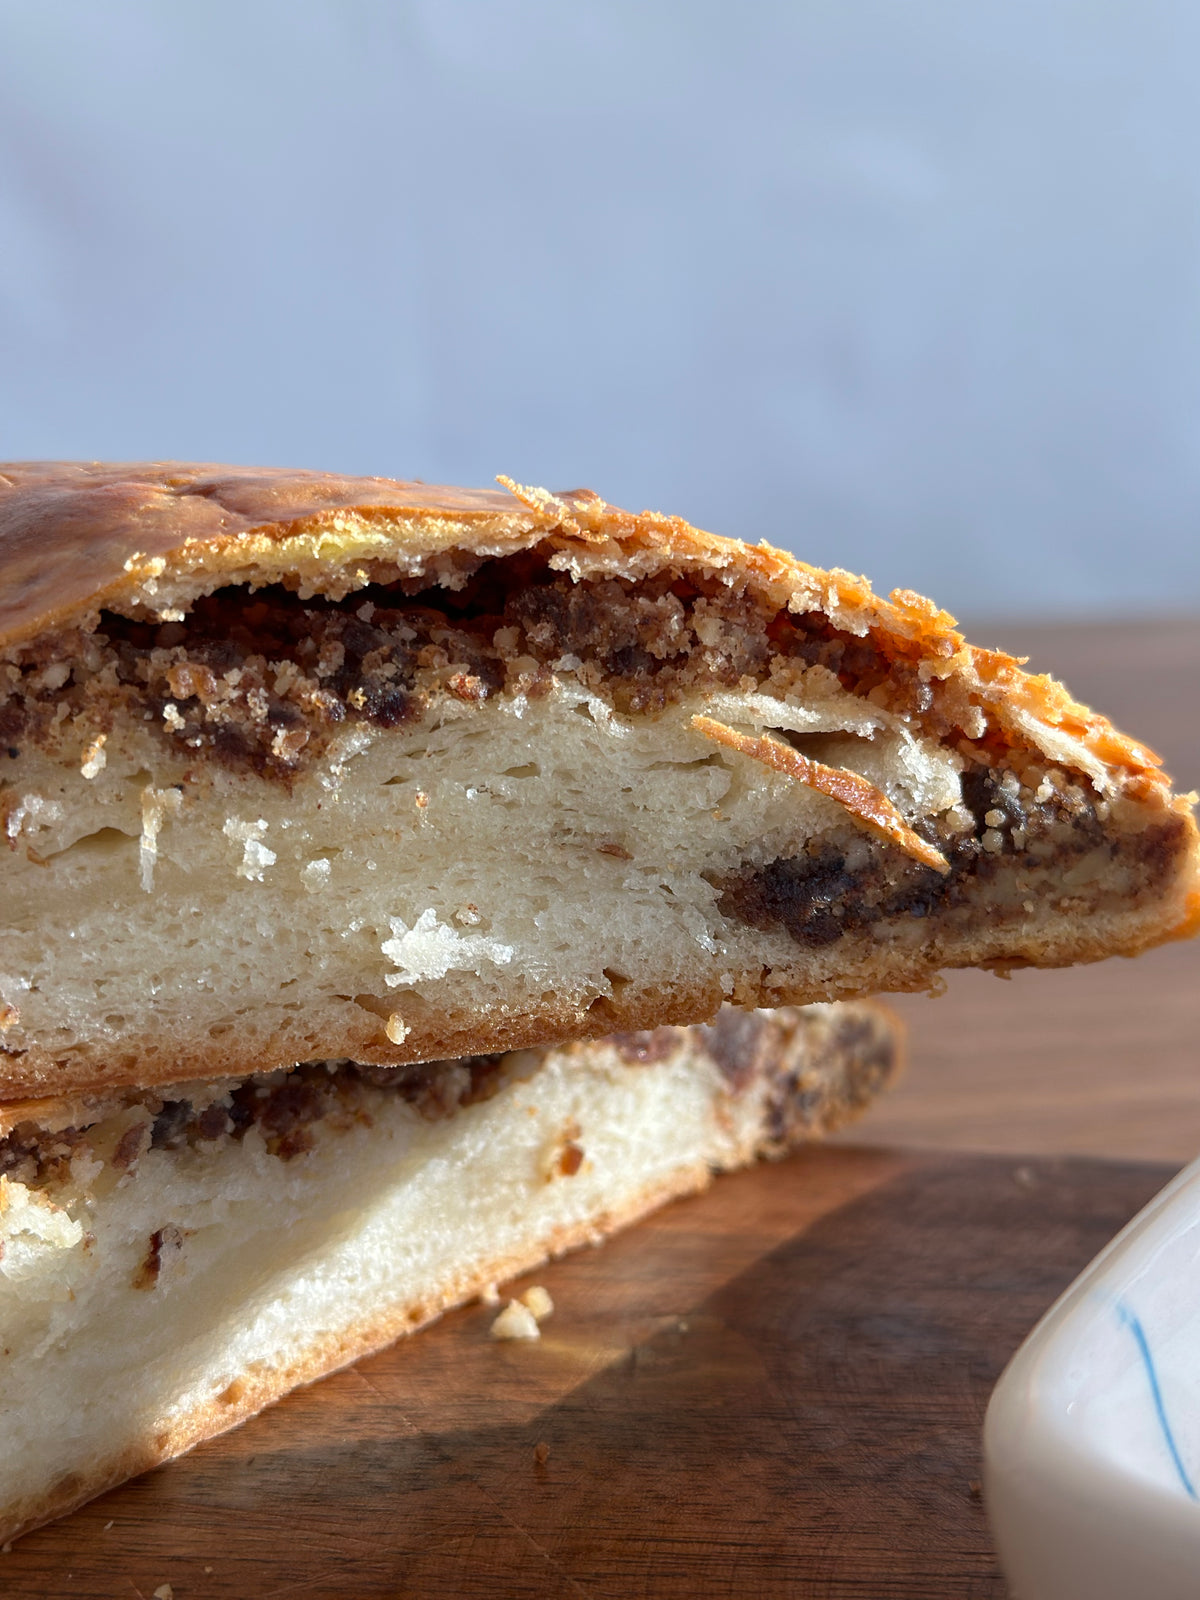 GaTa Bread Buttery Filled with date and Walnut